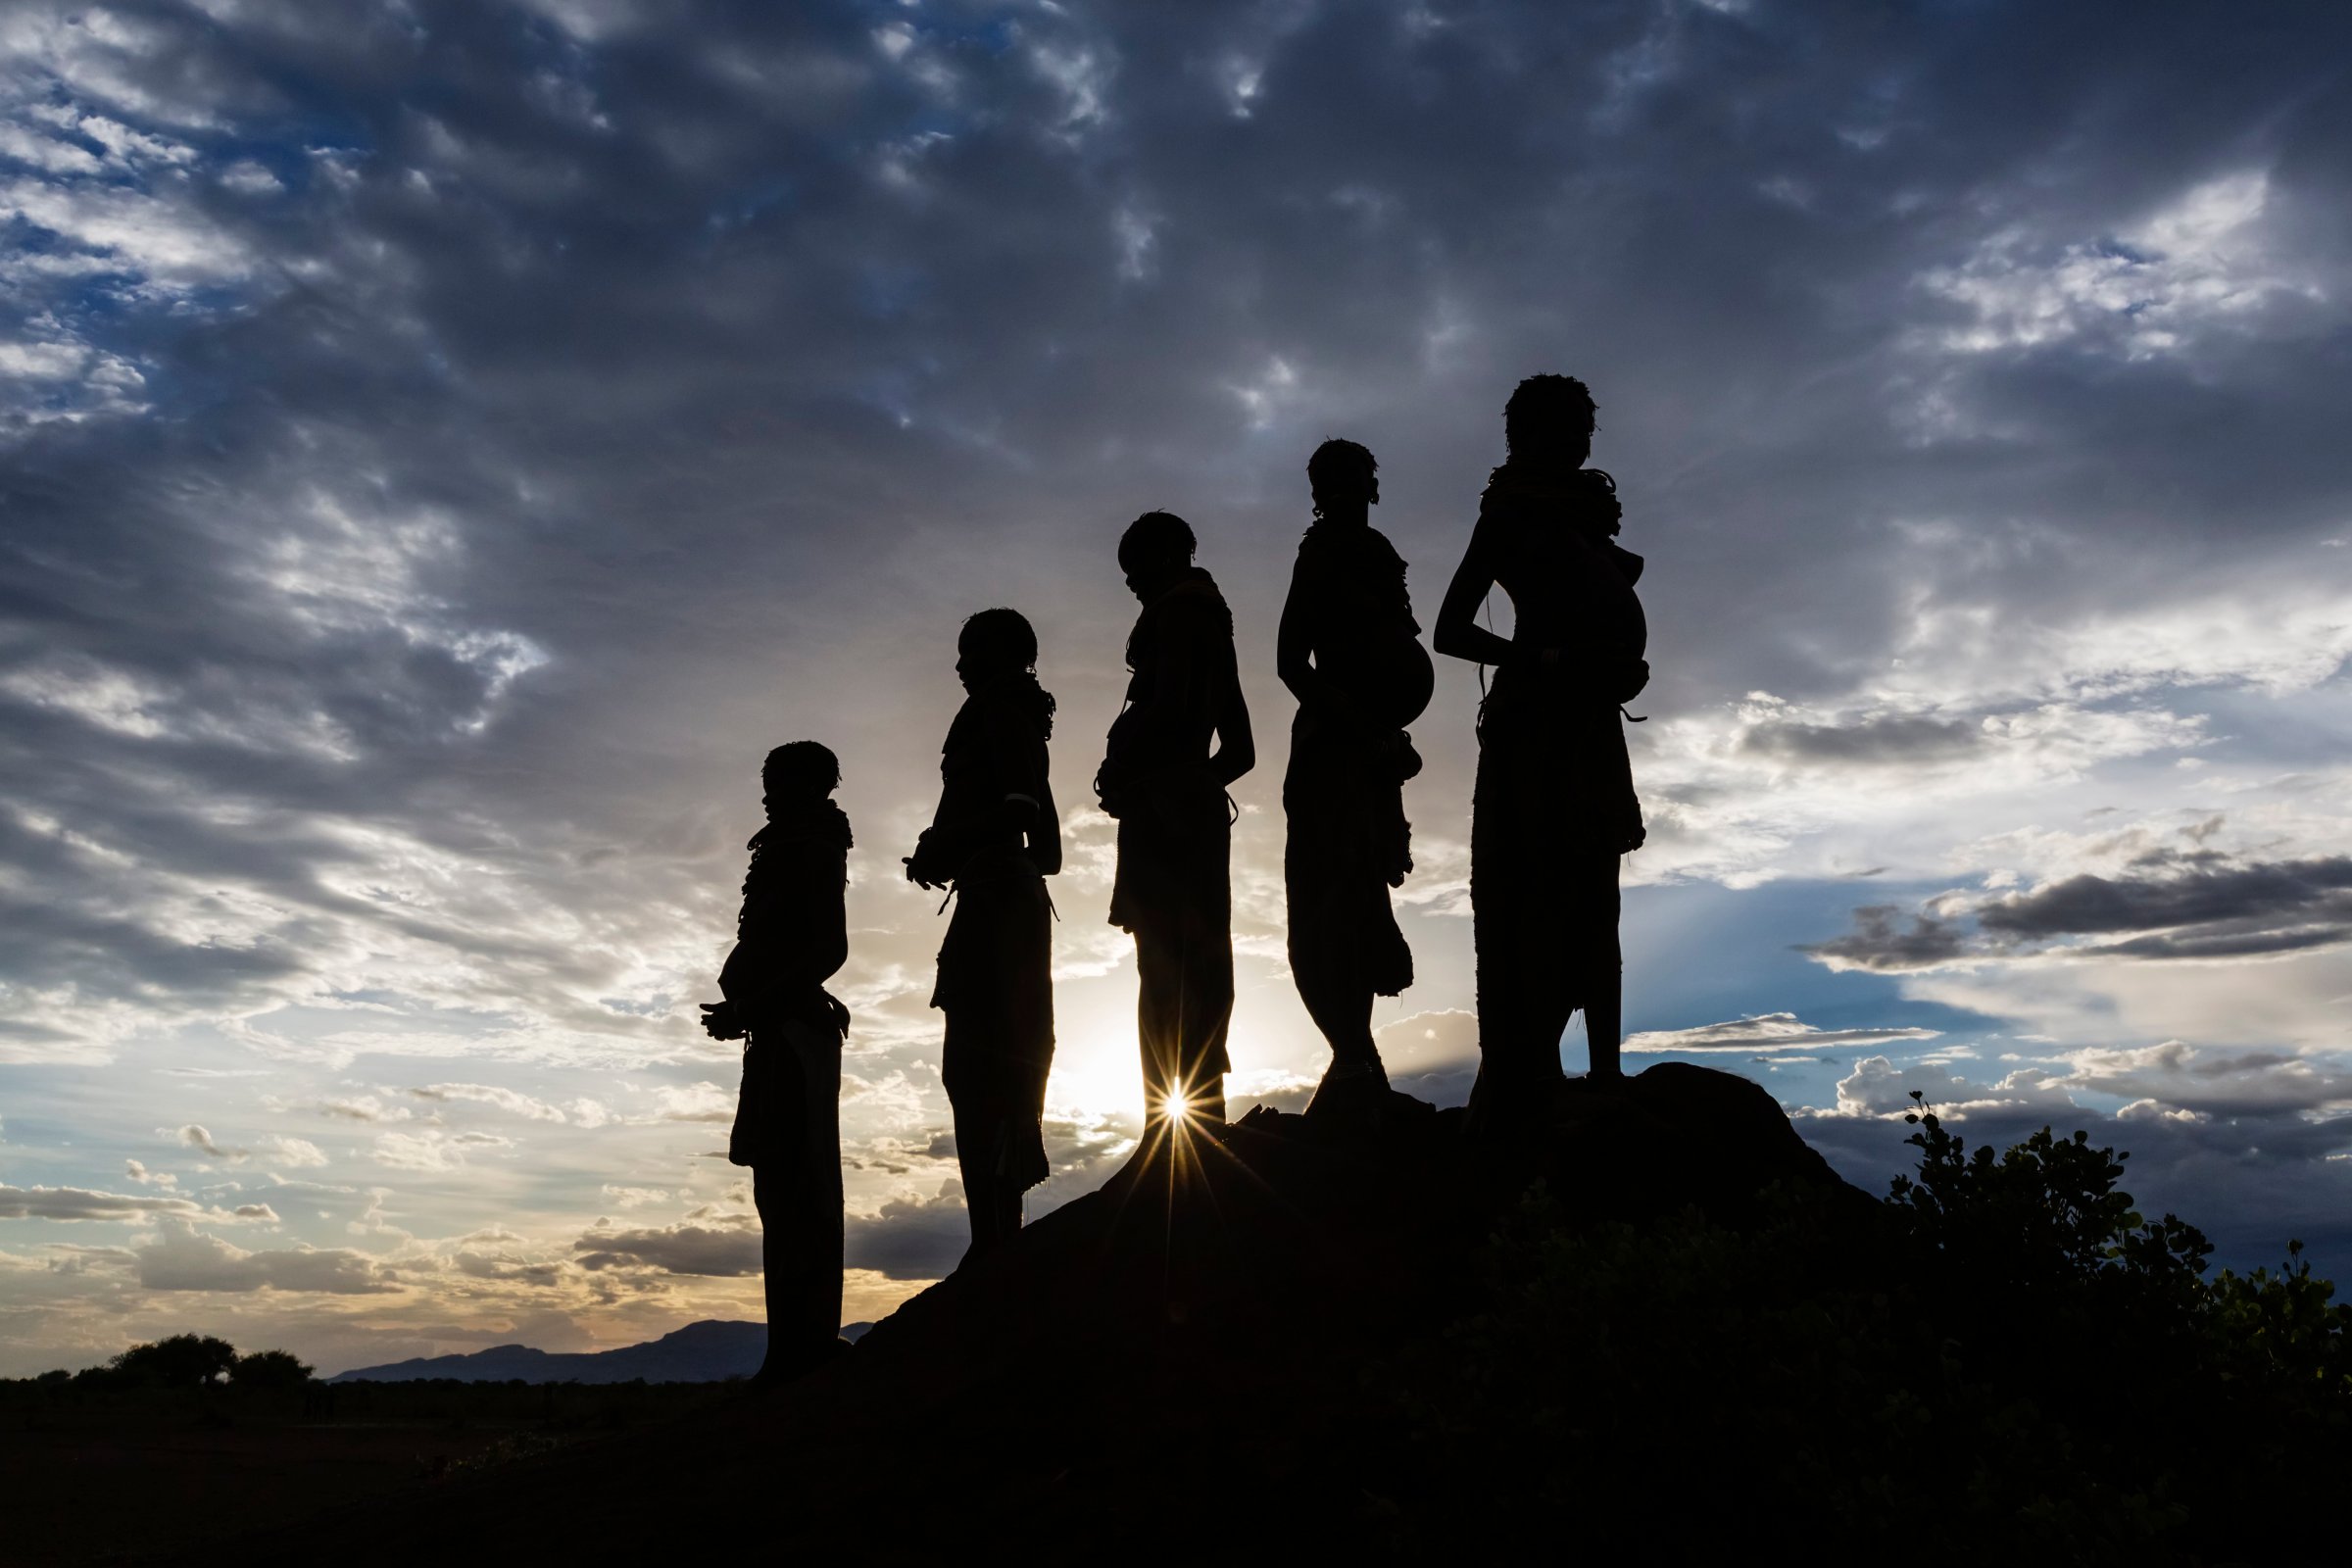 Silhouettes of pregnant woman under cloudy sky at sunset, Nyangaton, Ethiopia